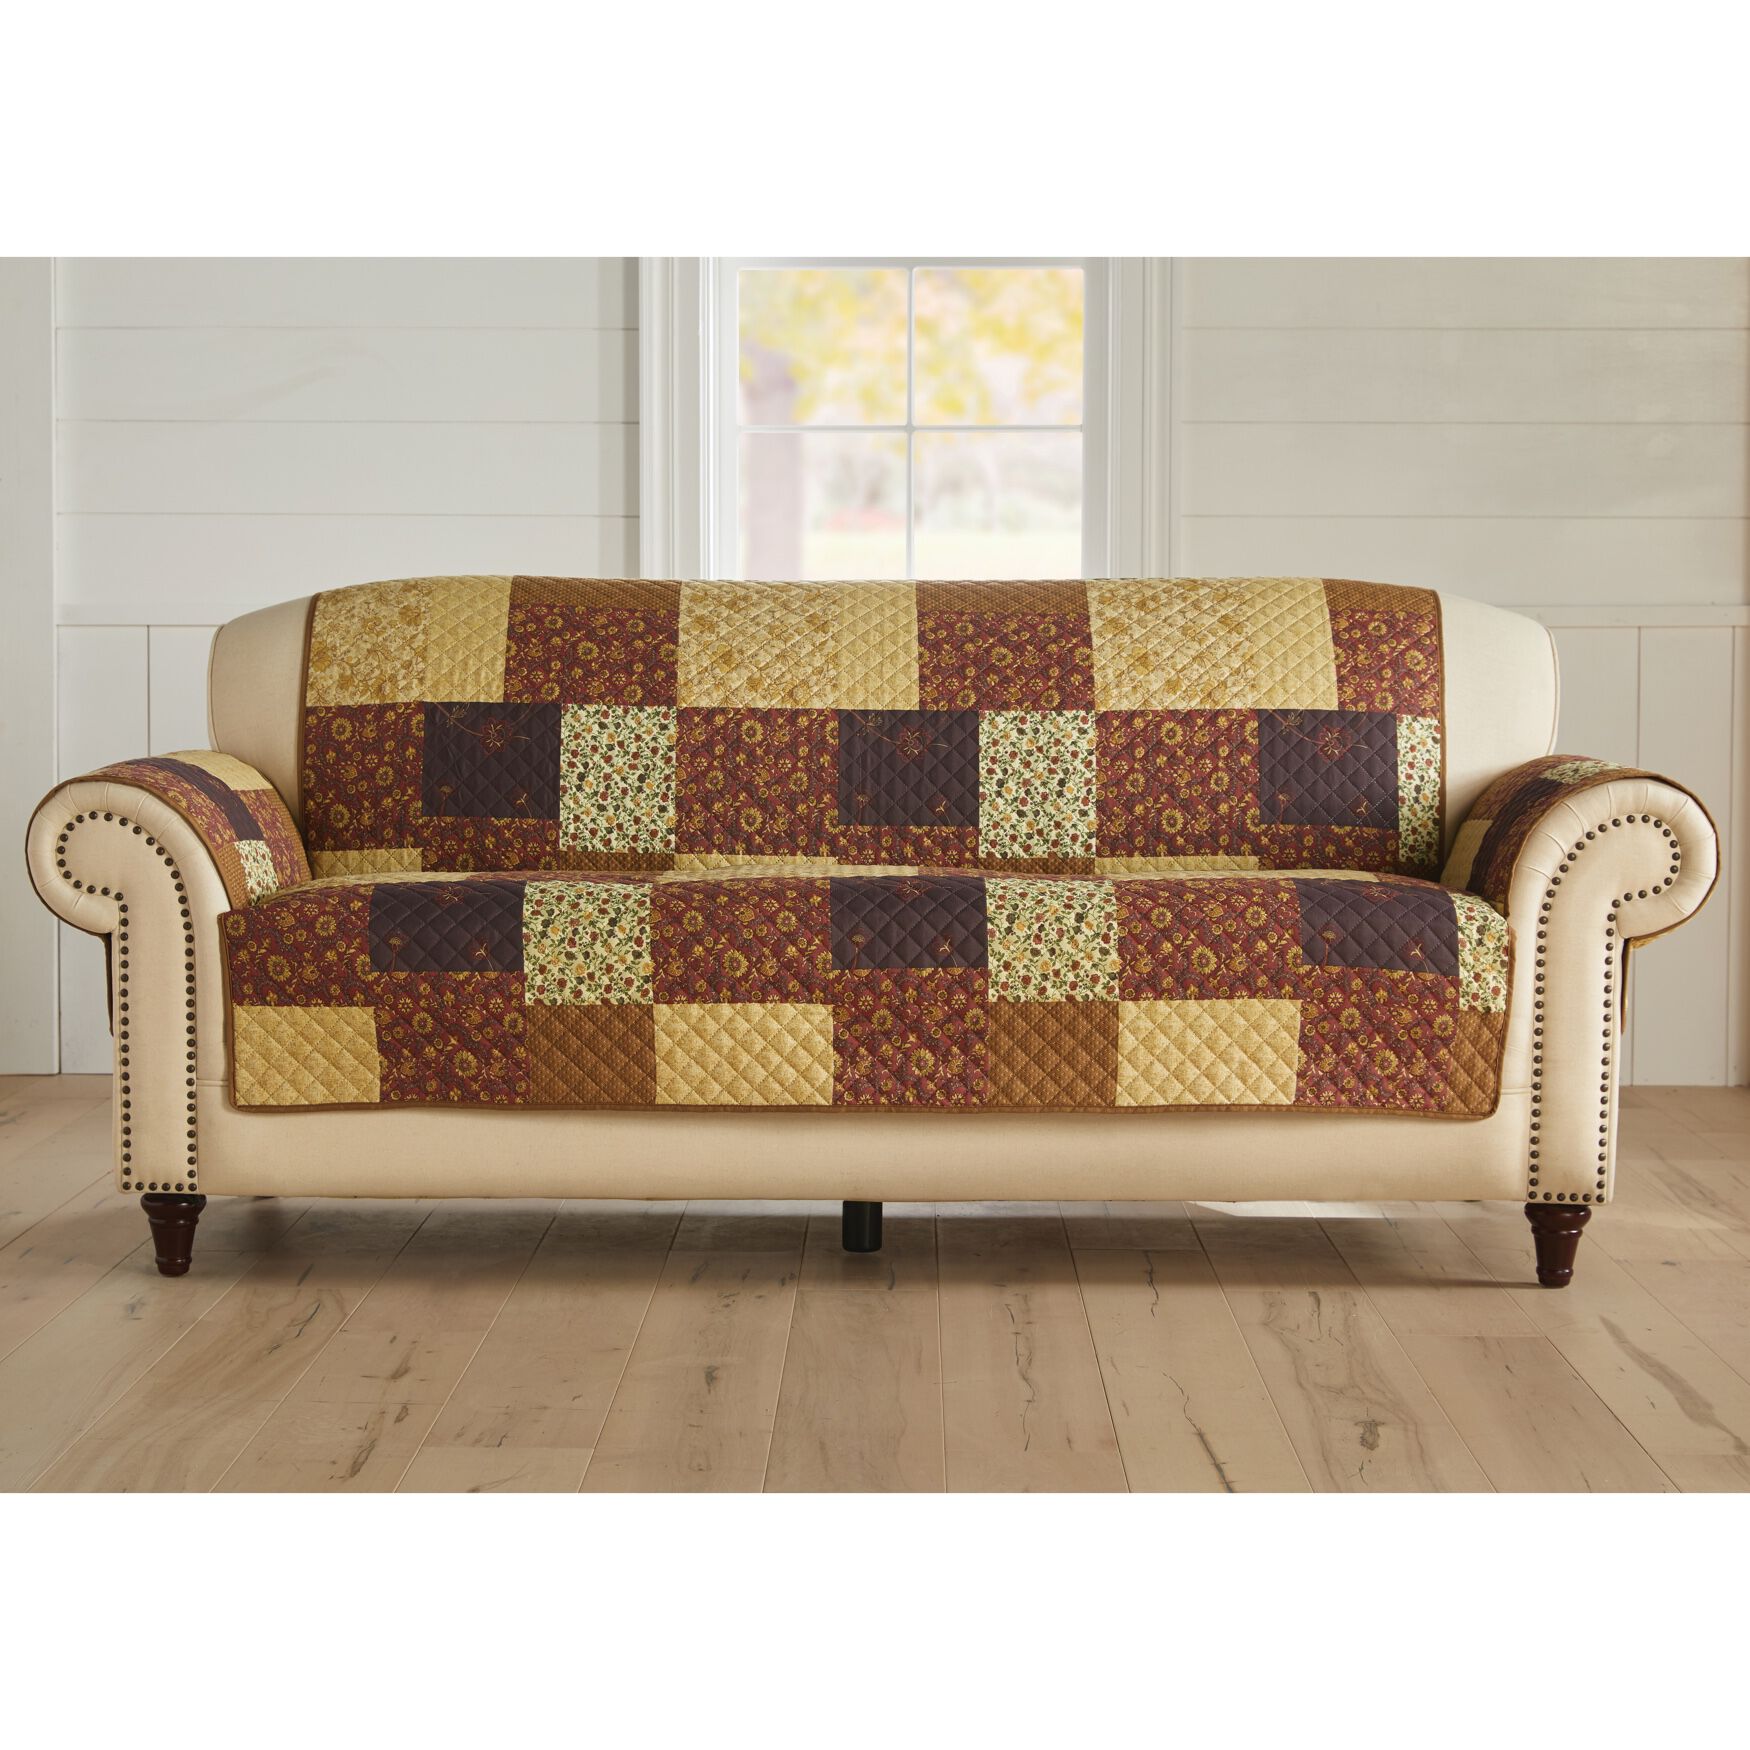 Printed Faux Patchwork Sofa Protector